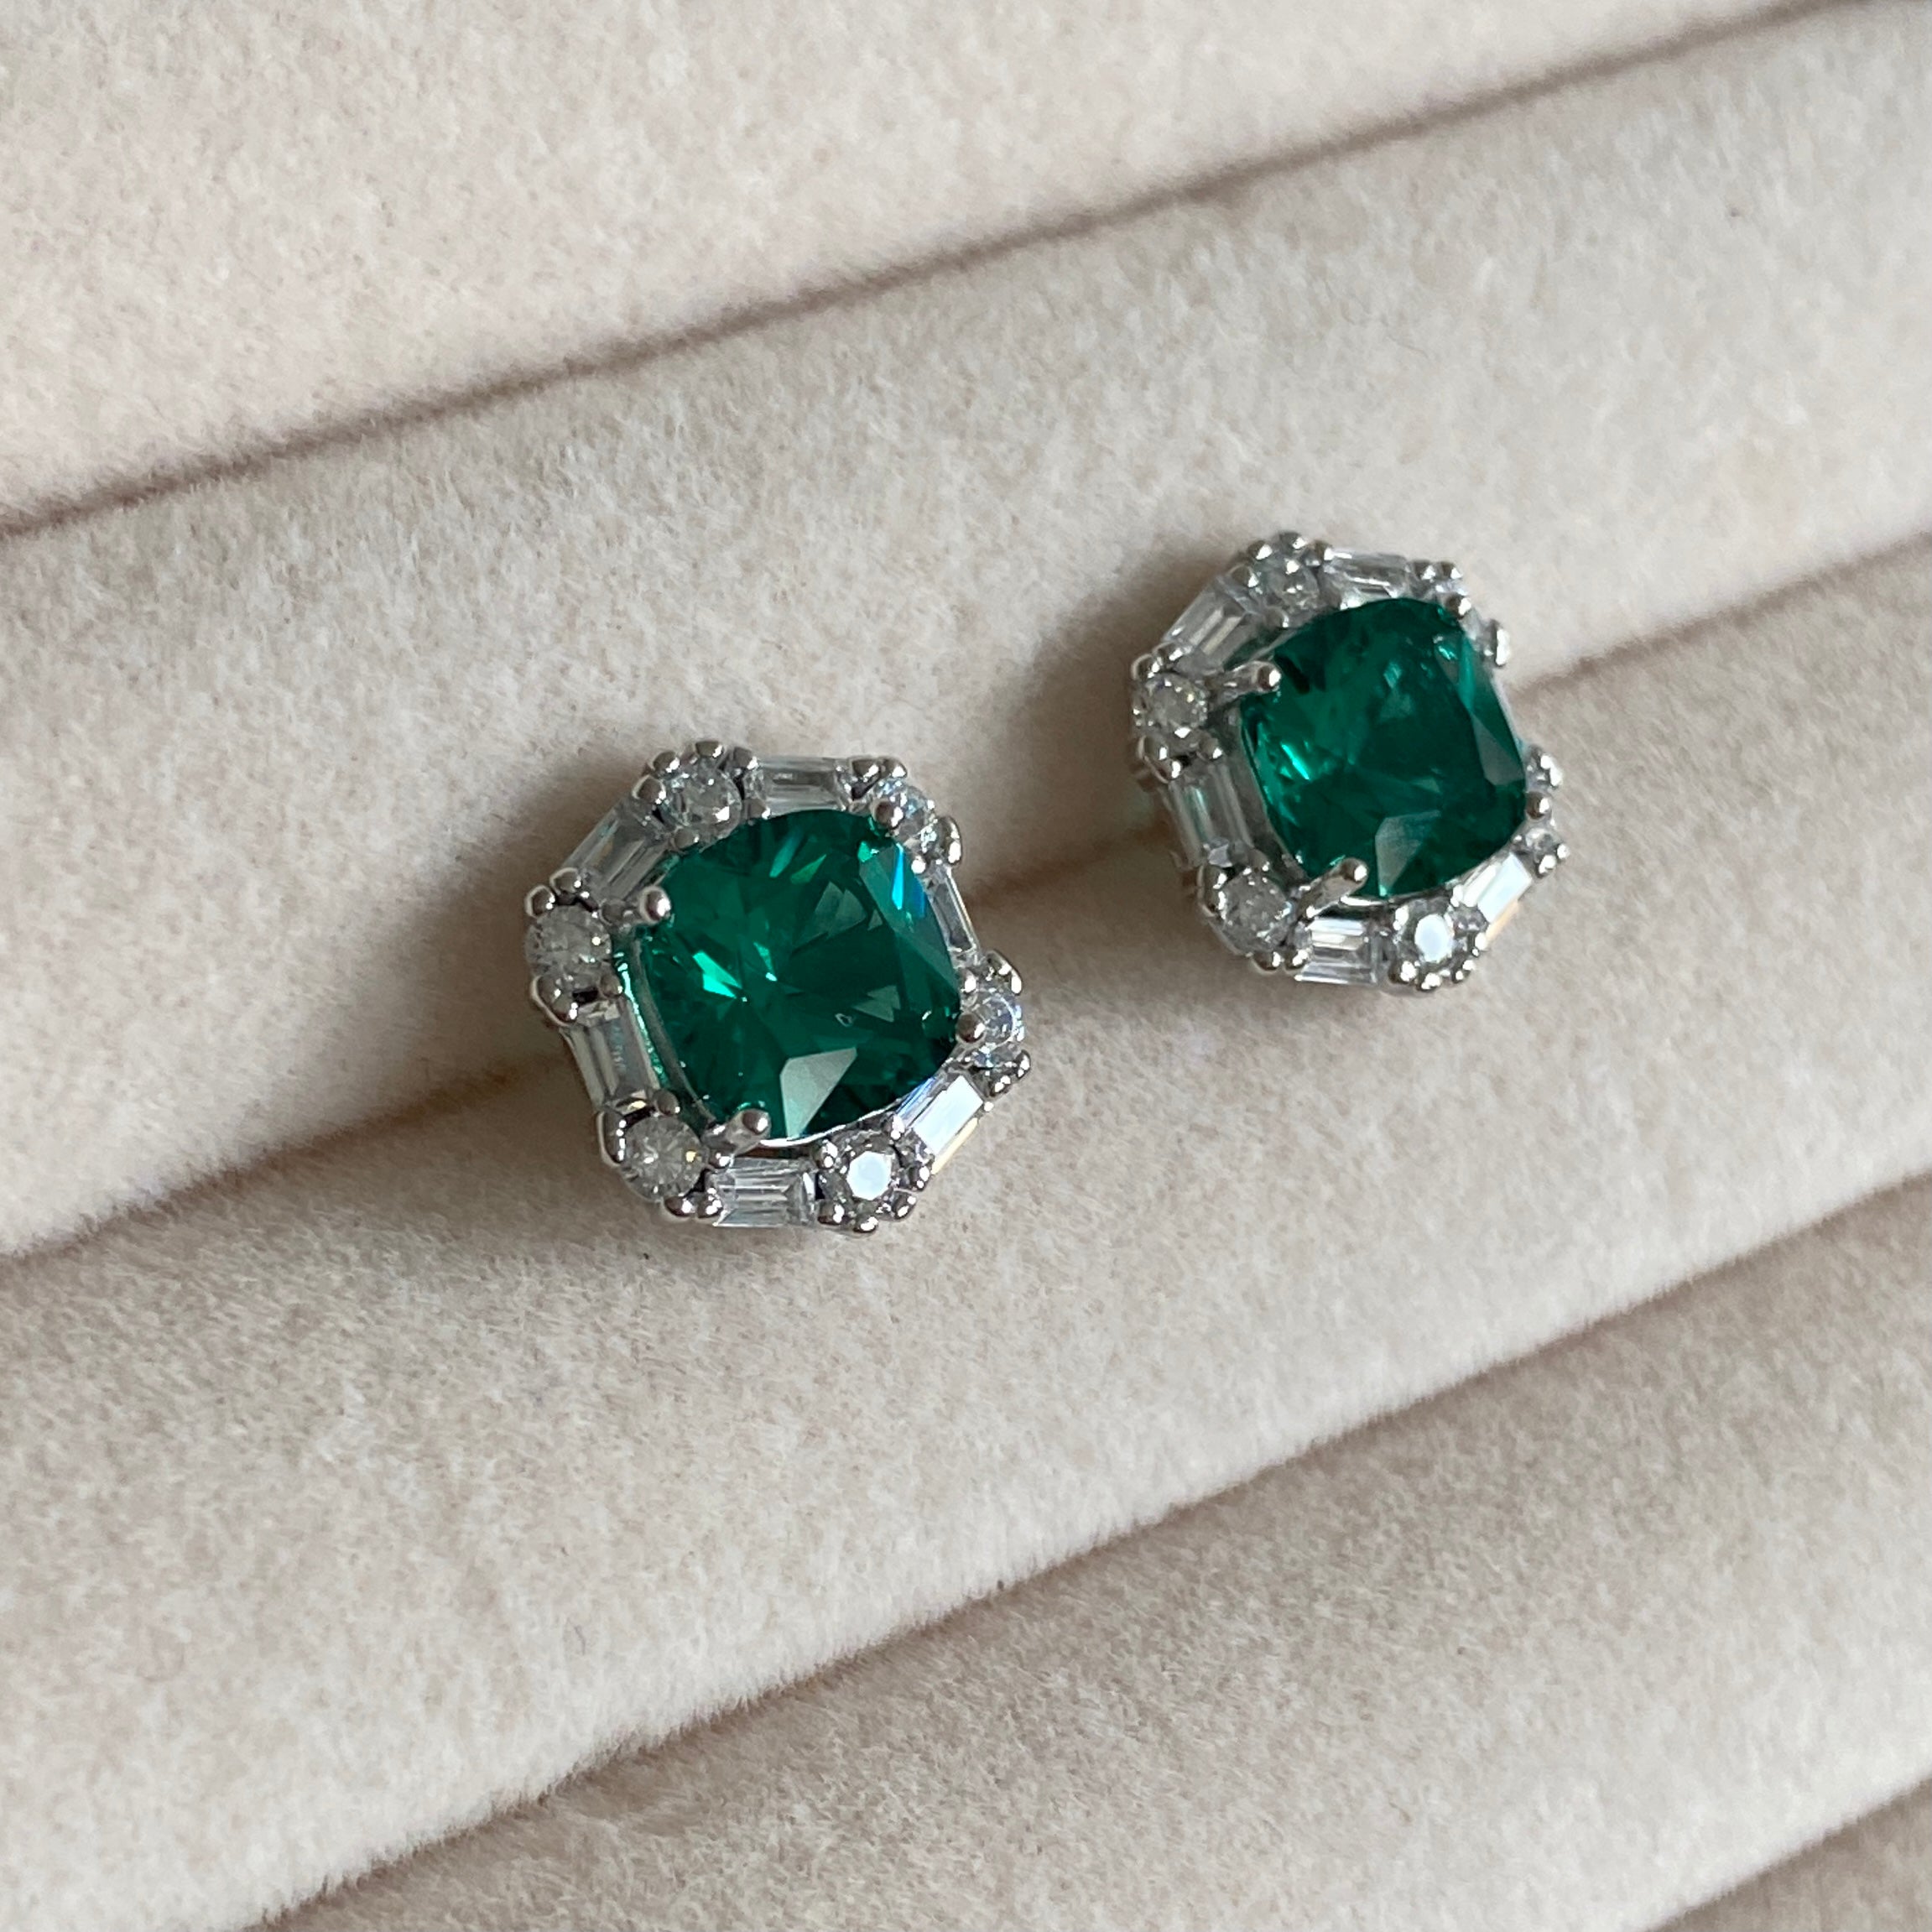 These classic Emerald Studs feature emerald-cut, CZ crystals set in a stunning 925 sterling silver frame. Delicate and timeless in design, these earrings will add the perfect touch of sophistication to any ensemble.  Earring Drop 1x1cm 